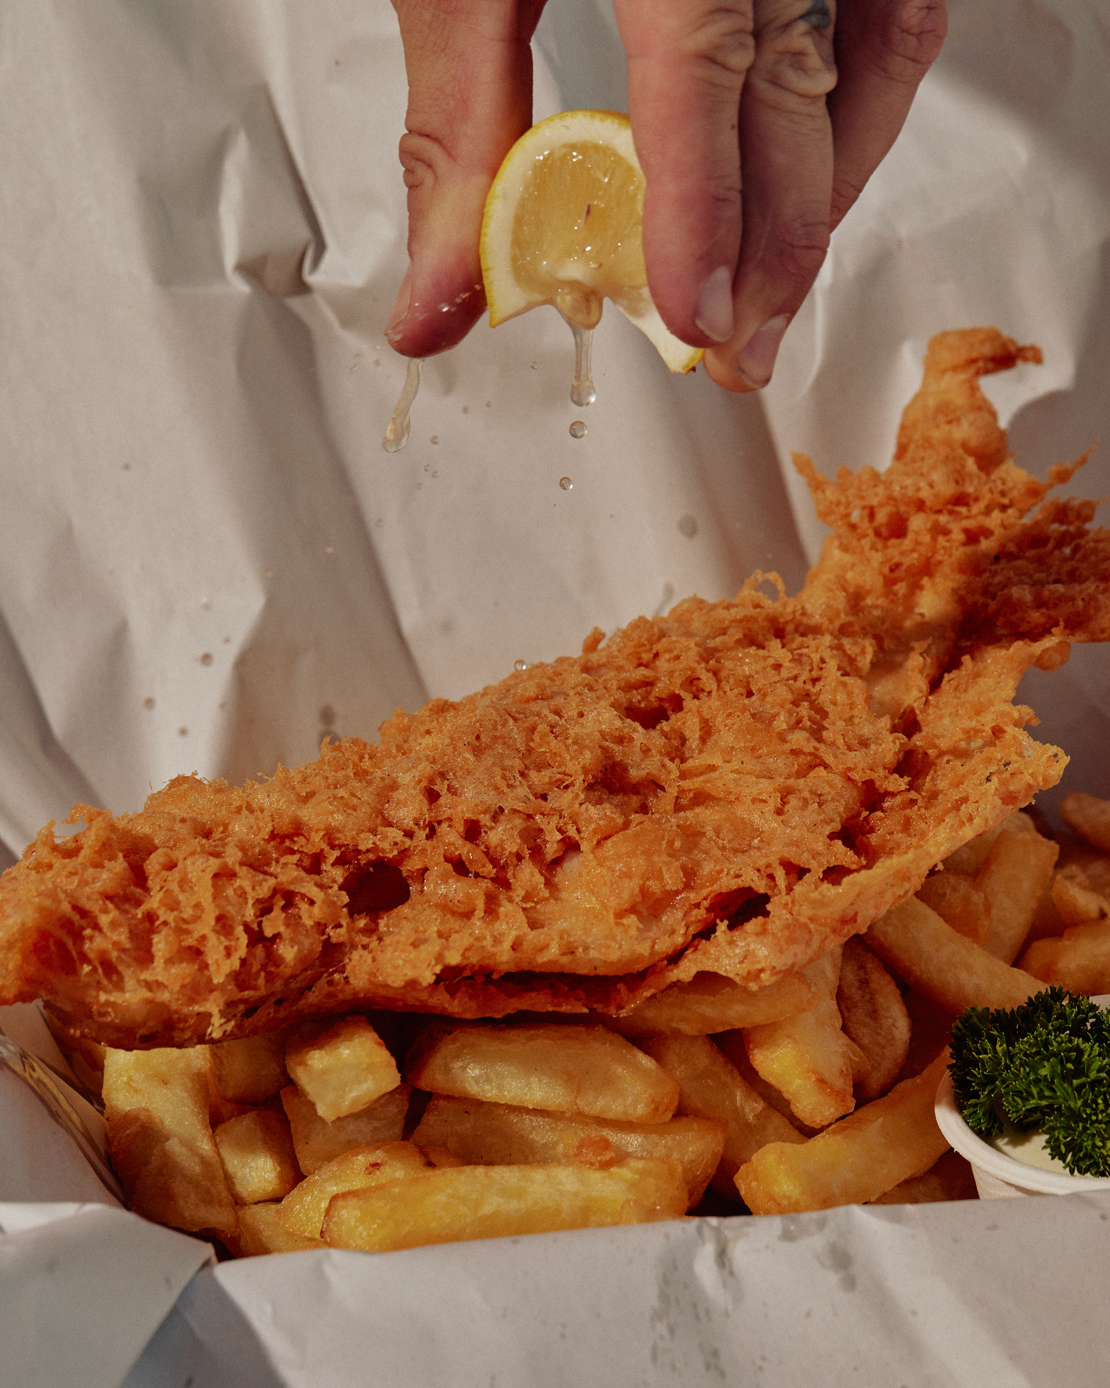 A person squeezing lemon onto fried fish at a fish and chips shop Melbourne.